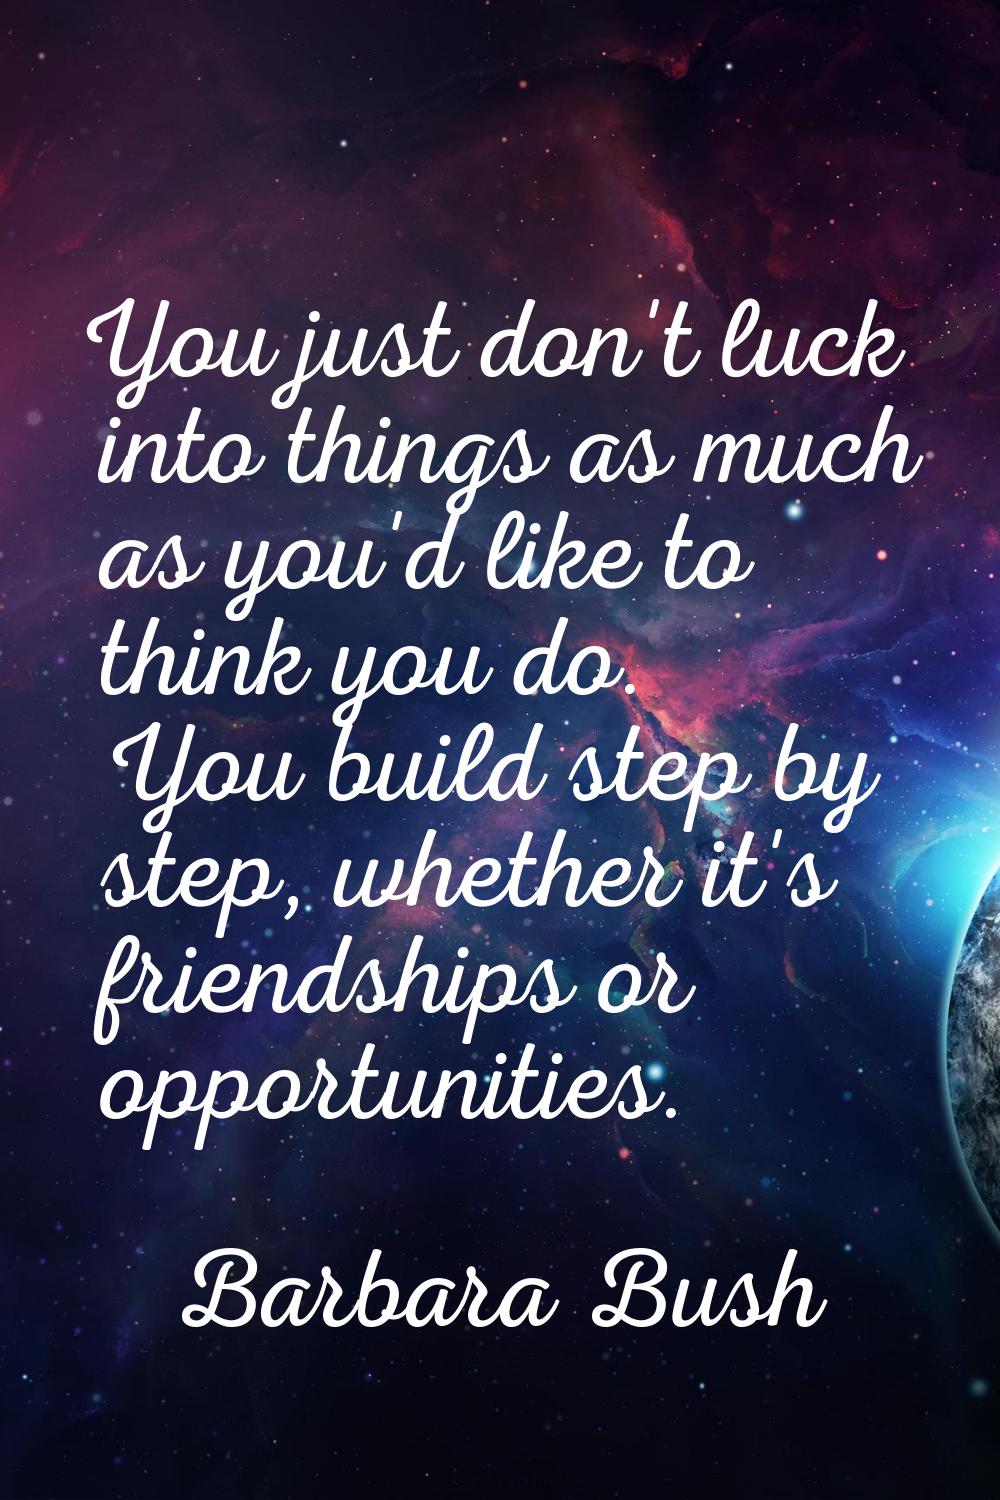 You just don't luck into things as much as you'd like to think you do. You build step by step, whet